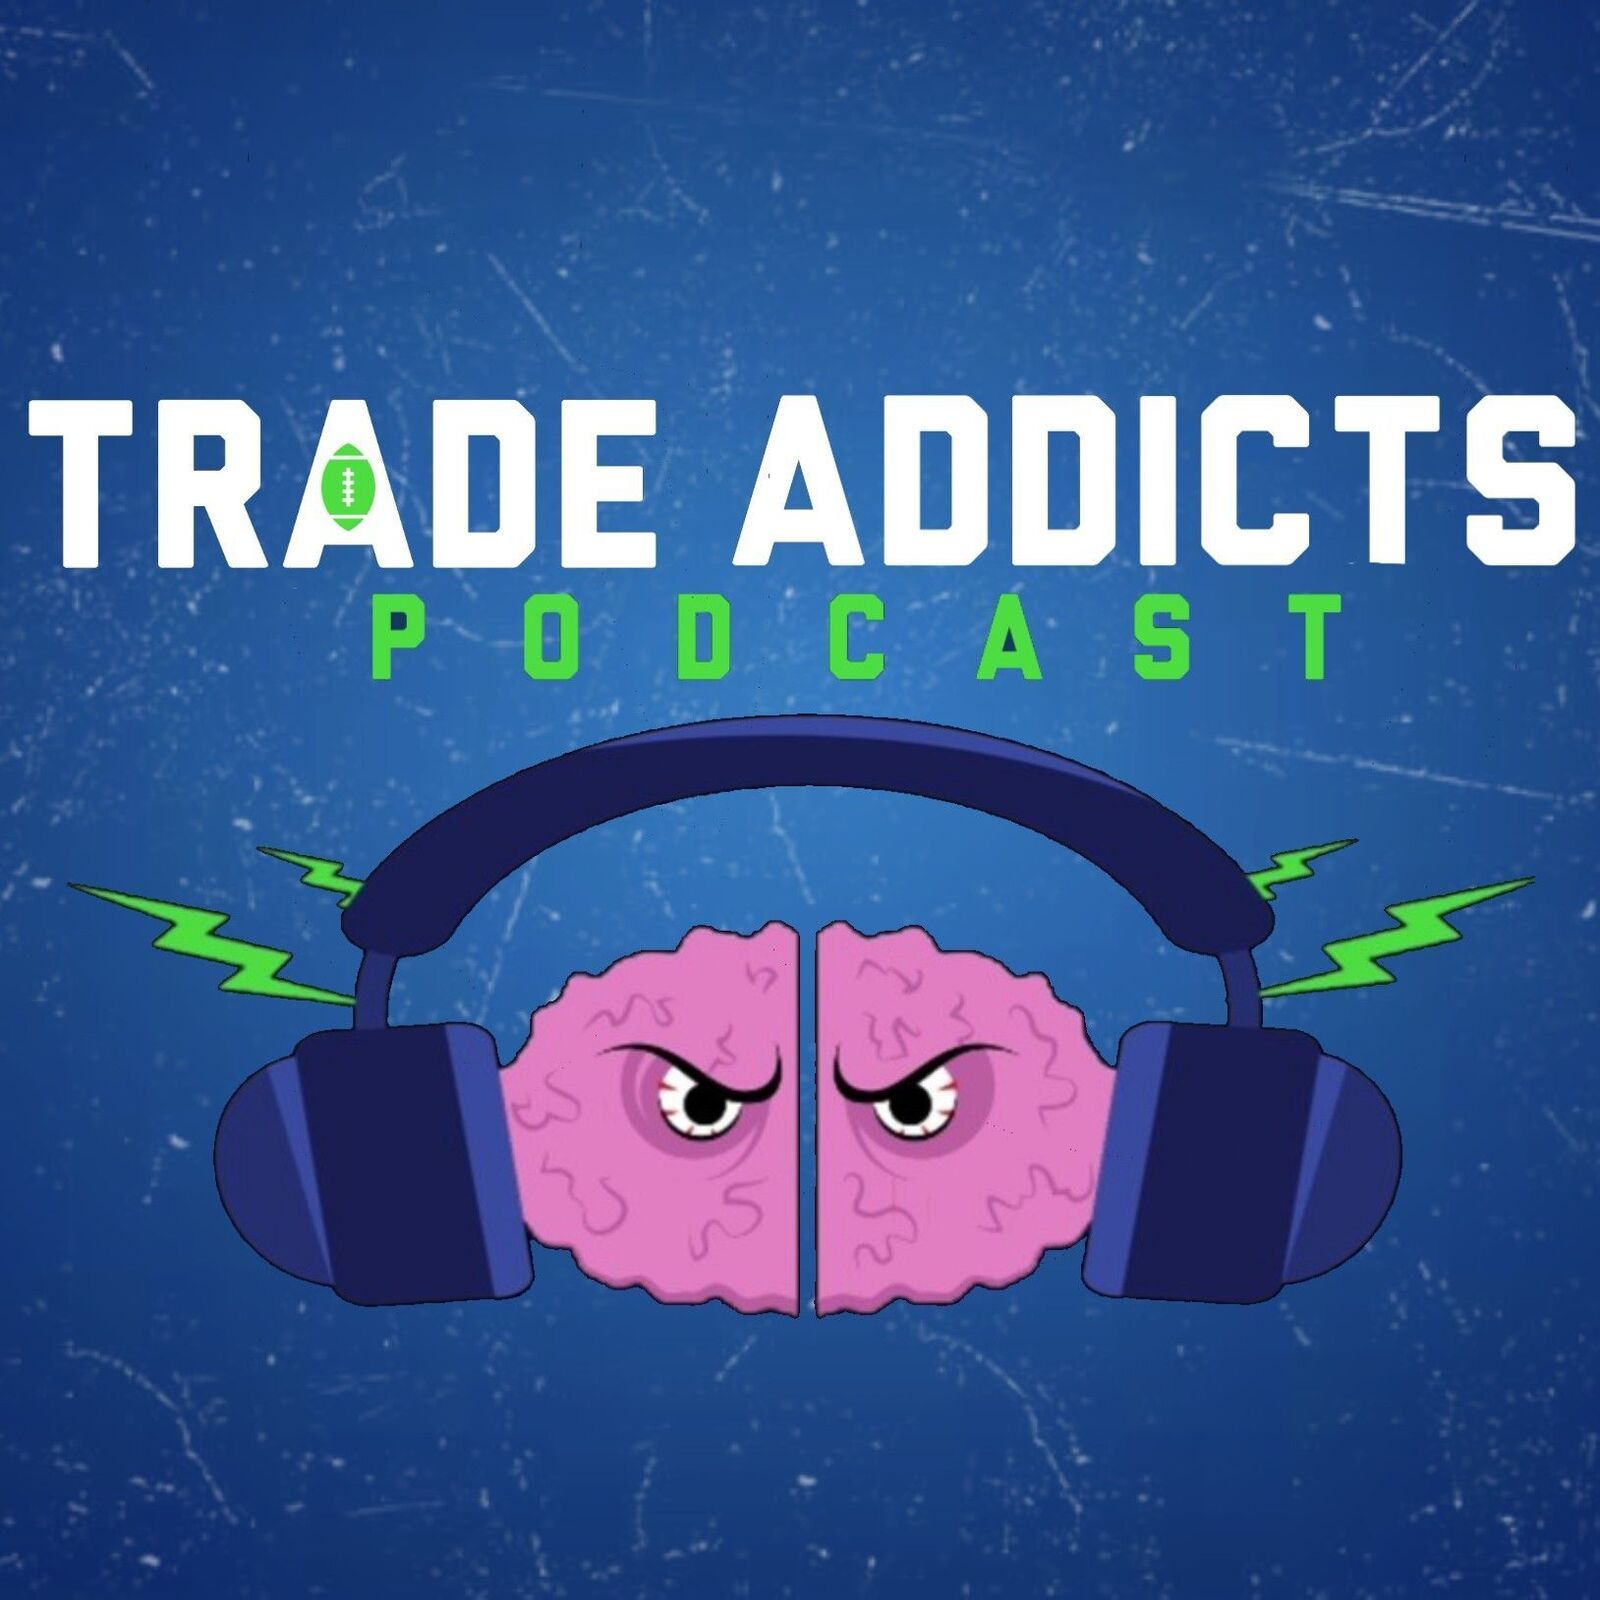 41: Trade Addicts Podcast Session 40 - Back in the Saddle Again